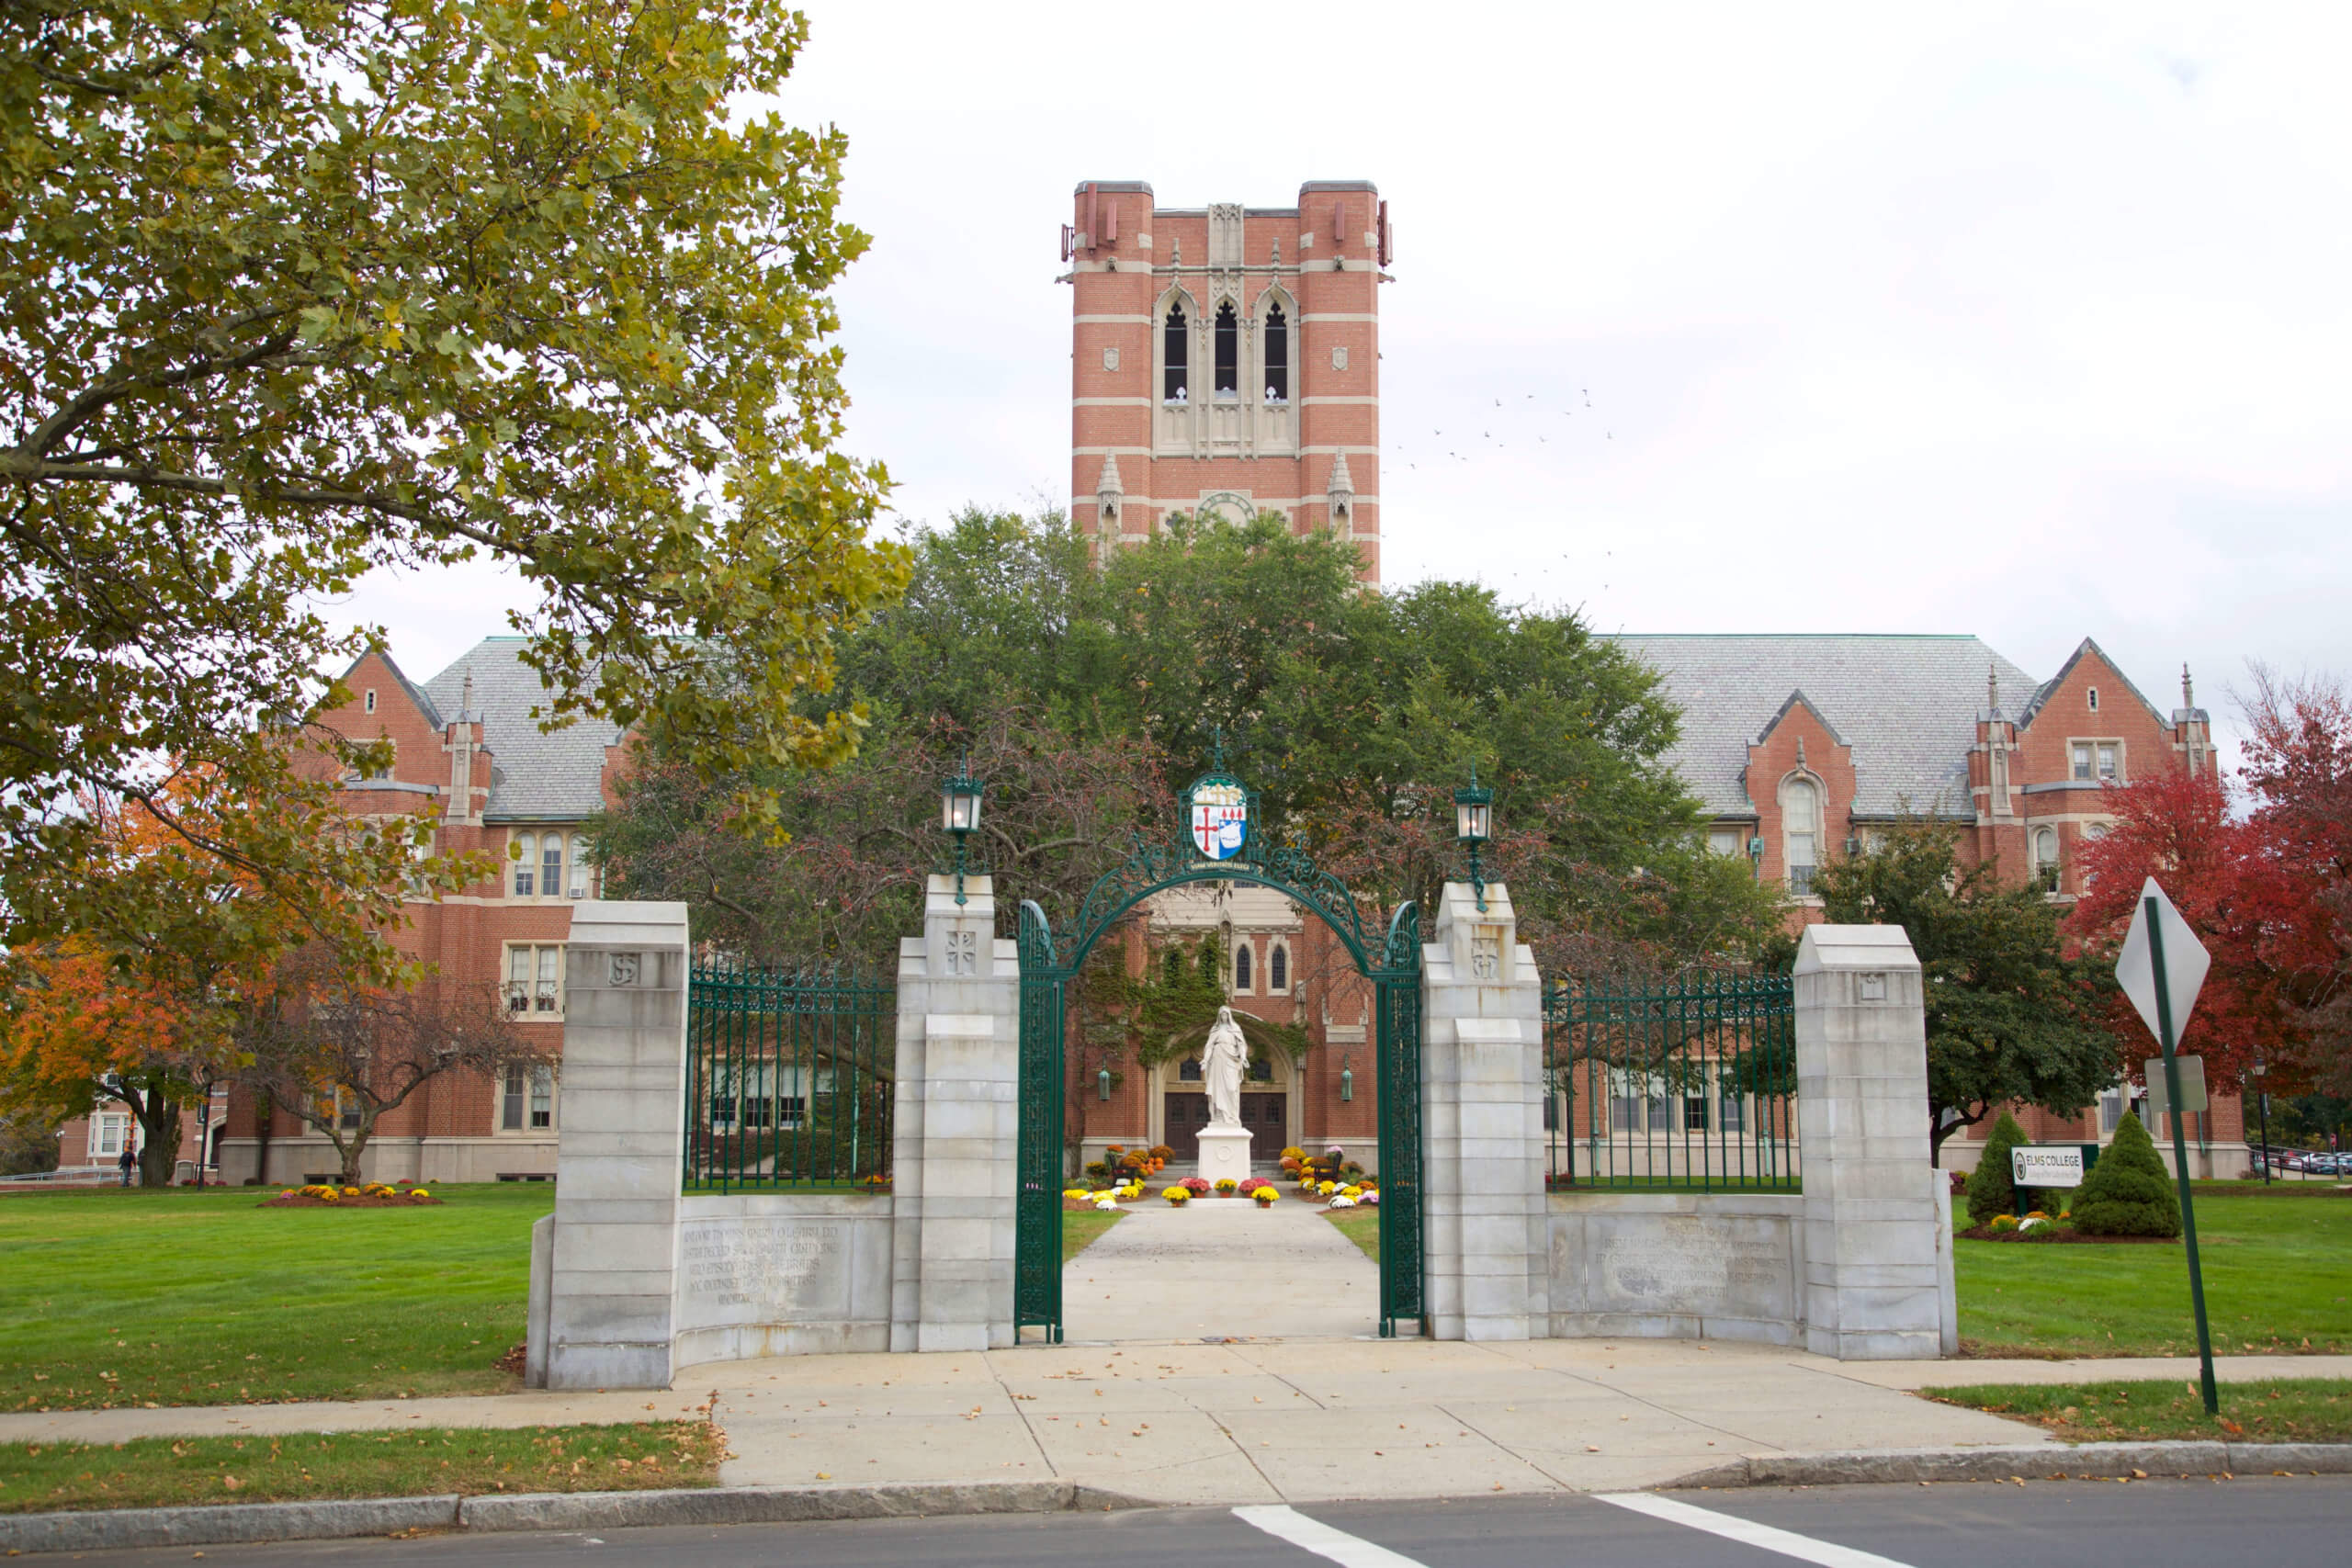 Photo of Berchmans Hall as seen from the gate to campus